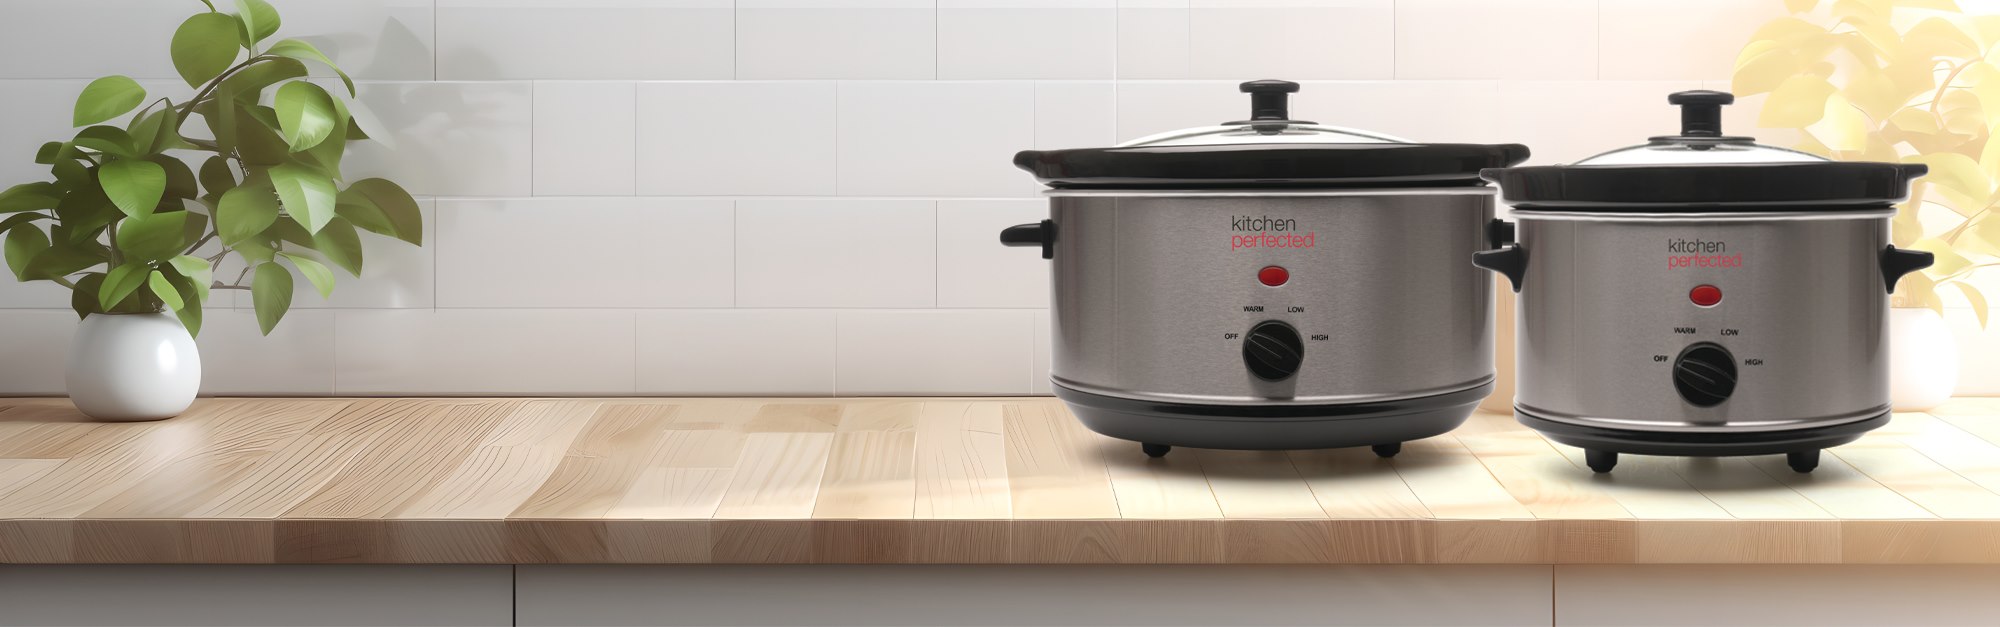 NEW KitchenPerfected®  SLOW COOKERS